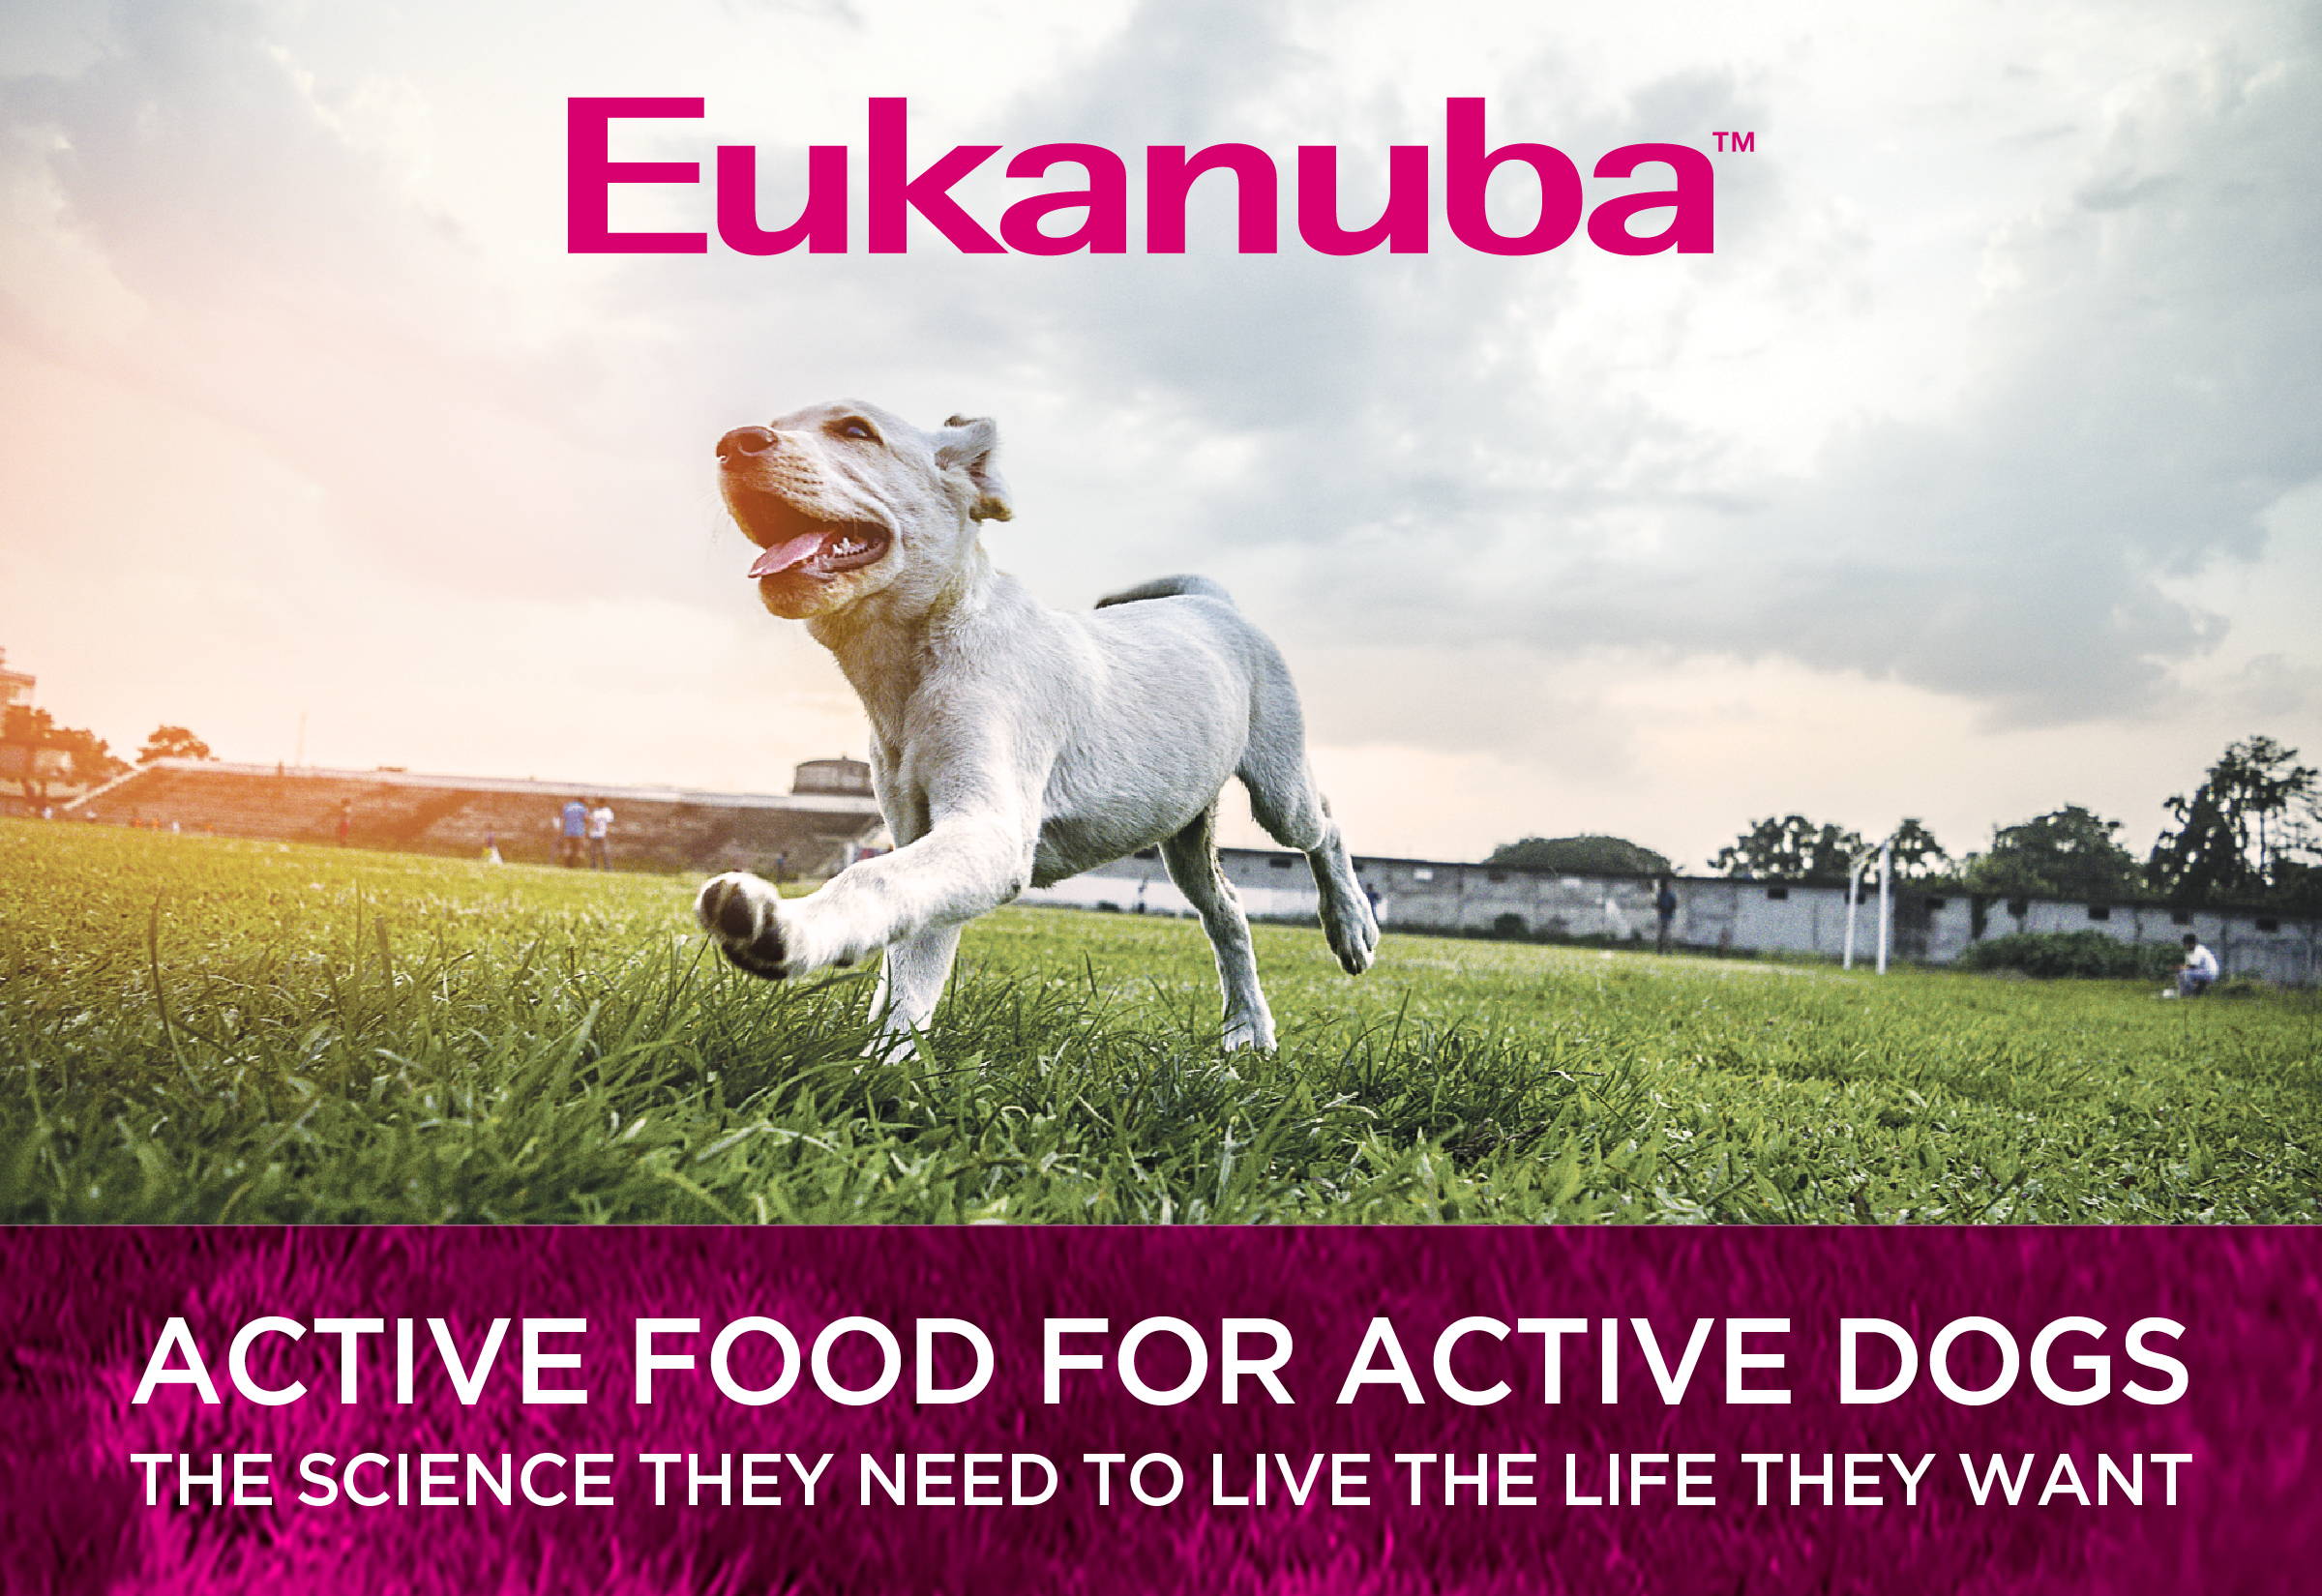 Eukanuba - active food for active dogs